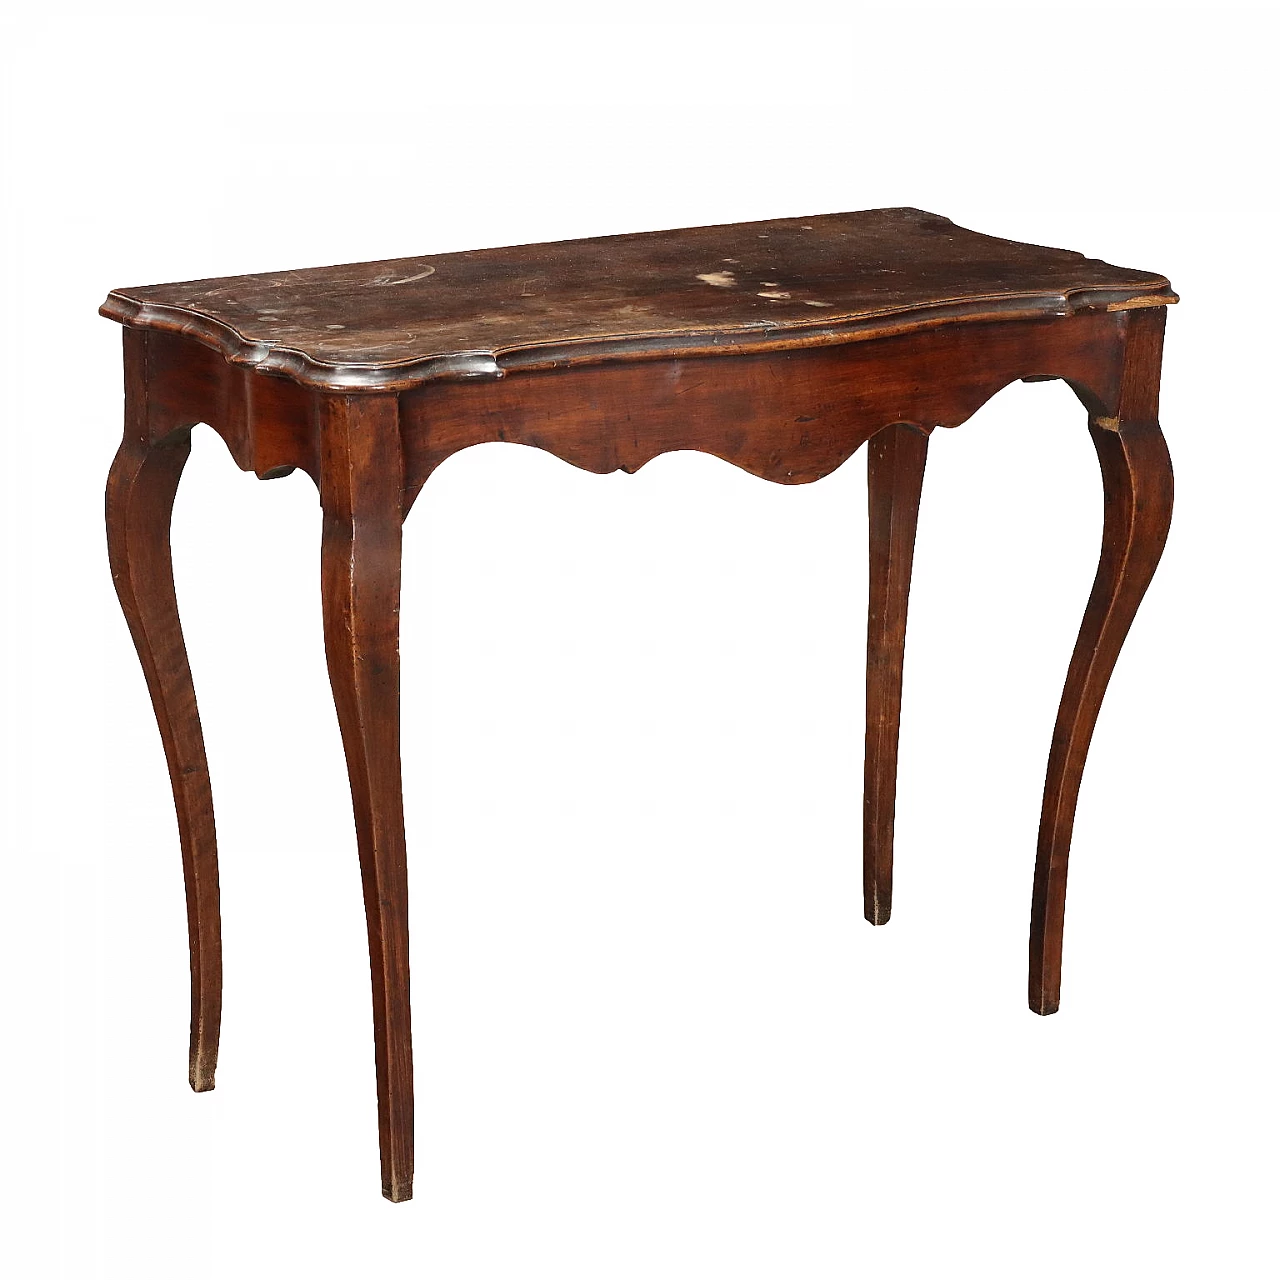 Console in cherry wood with walnut top and wavy legs, 18th century 1